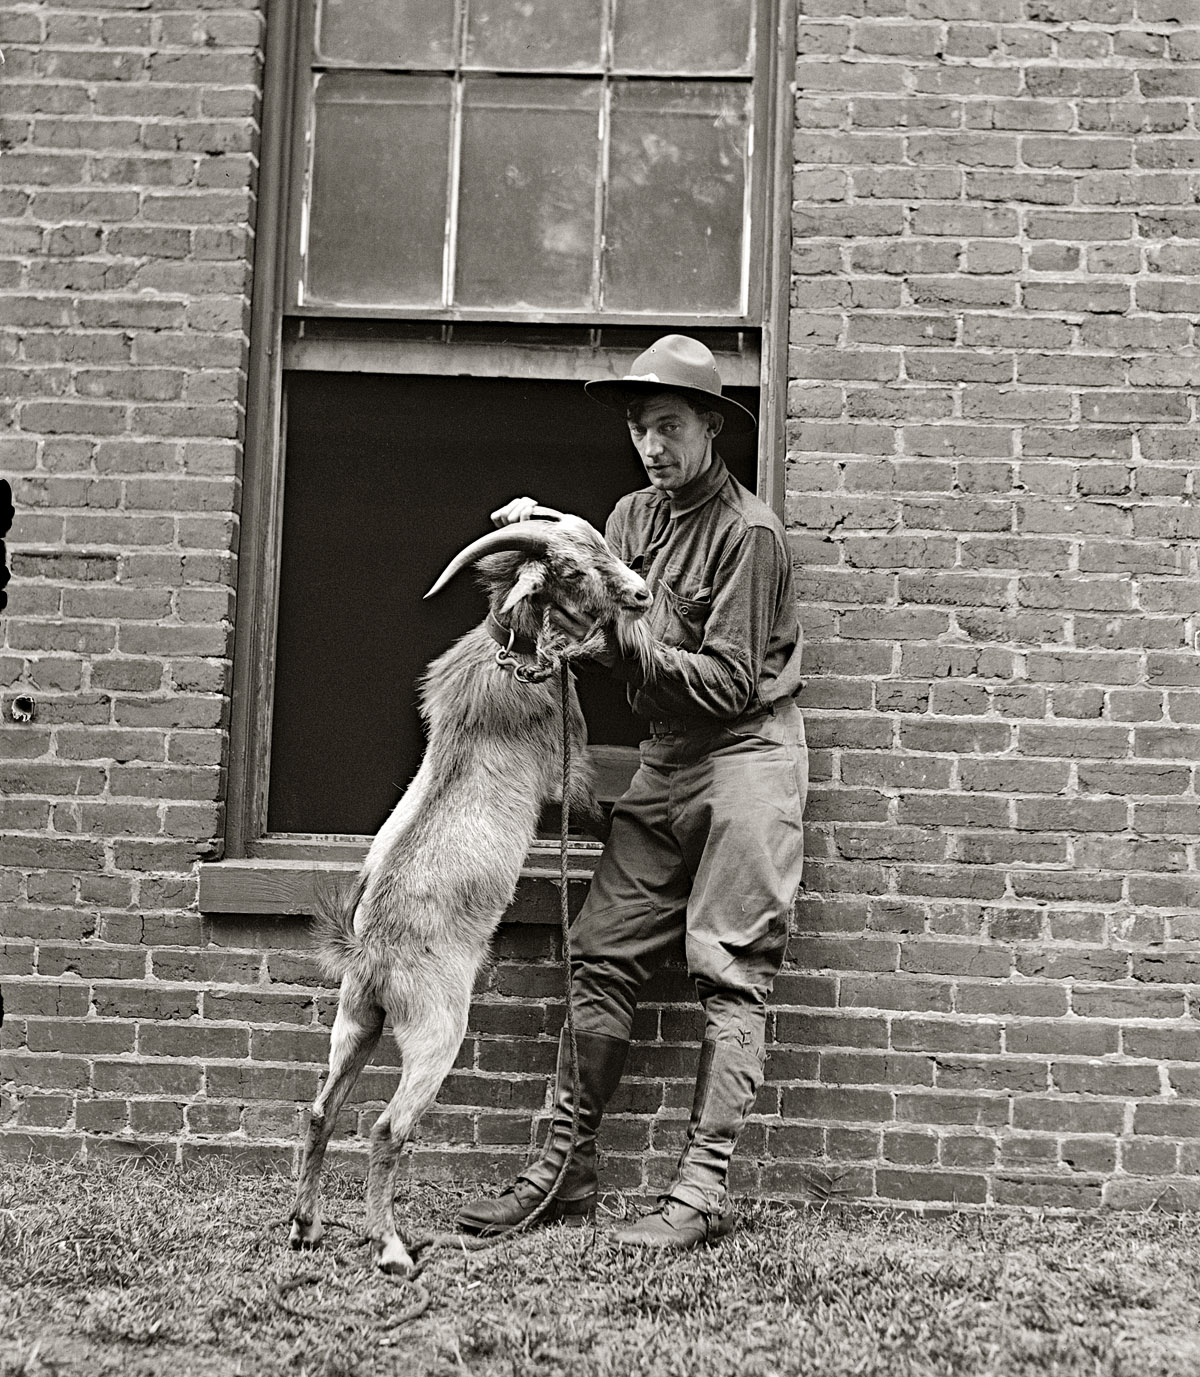 Washington, D.C. September 5, 1929. "William Harrison Bones, Stinson Goat." The elopement came as a shock to both of their families. View full size. Update: Thanks to Stanton Square we now know that the caption should read "William Hamilton Bones, Stimson goat." Who had a substance-abuse problem.